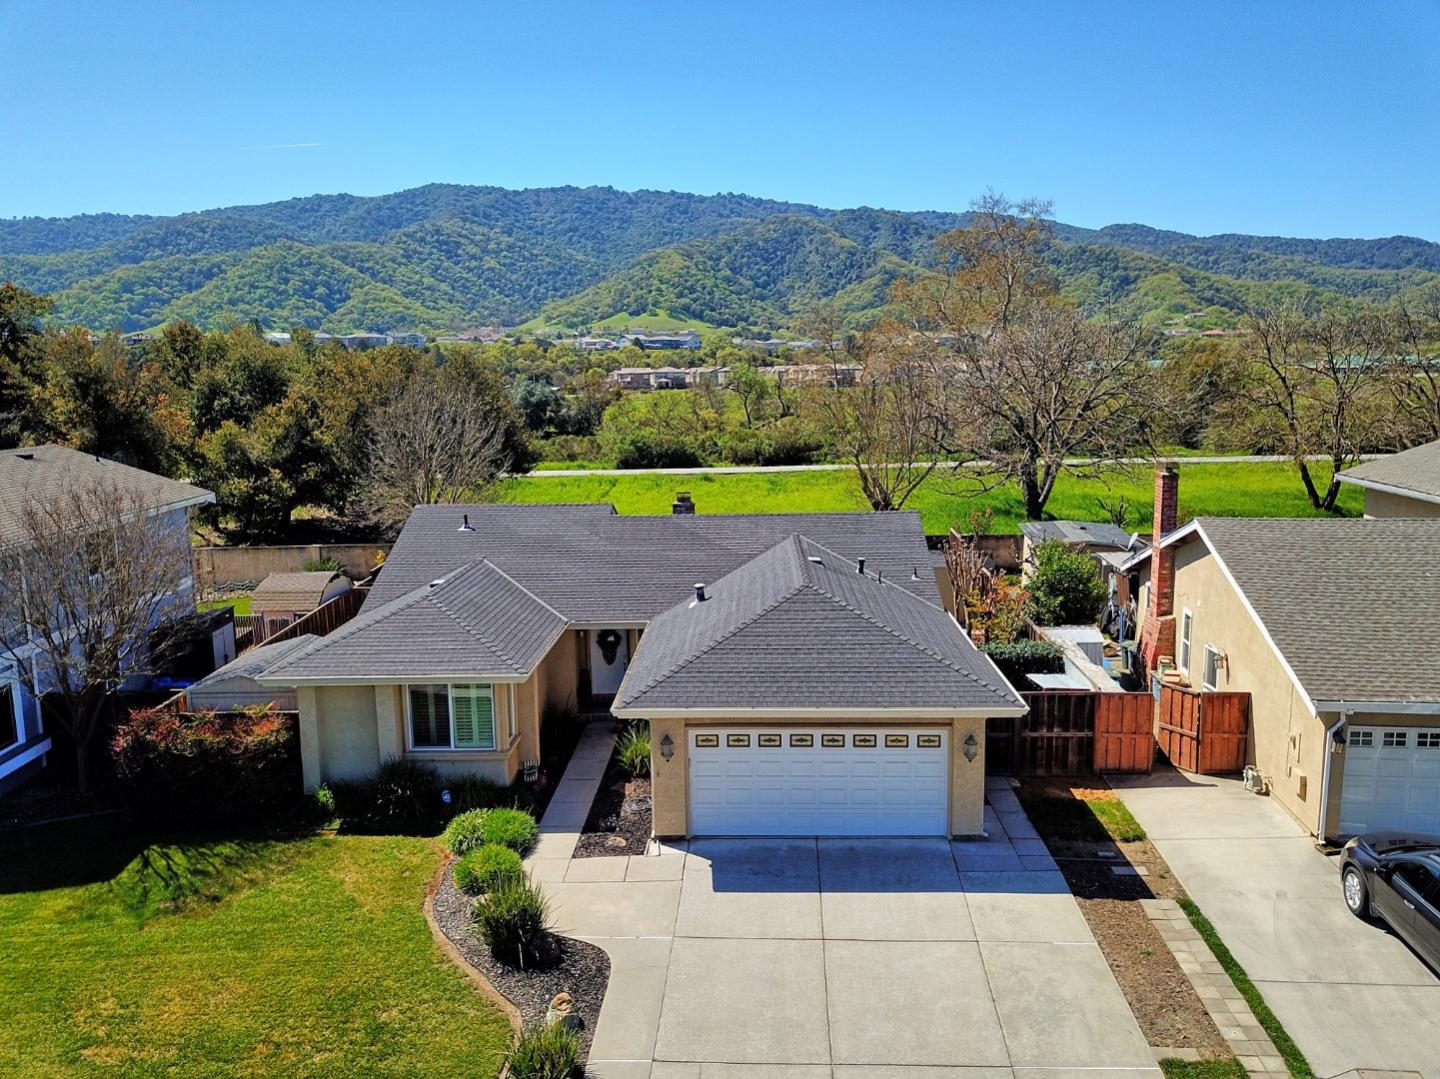 Photo of 7359 Crawford Dr in Gilroy, CA